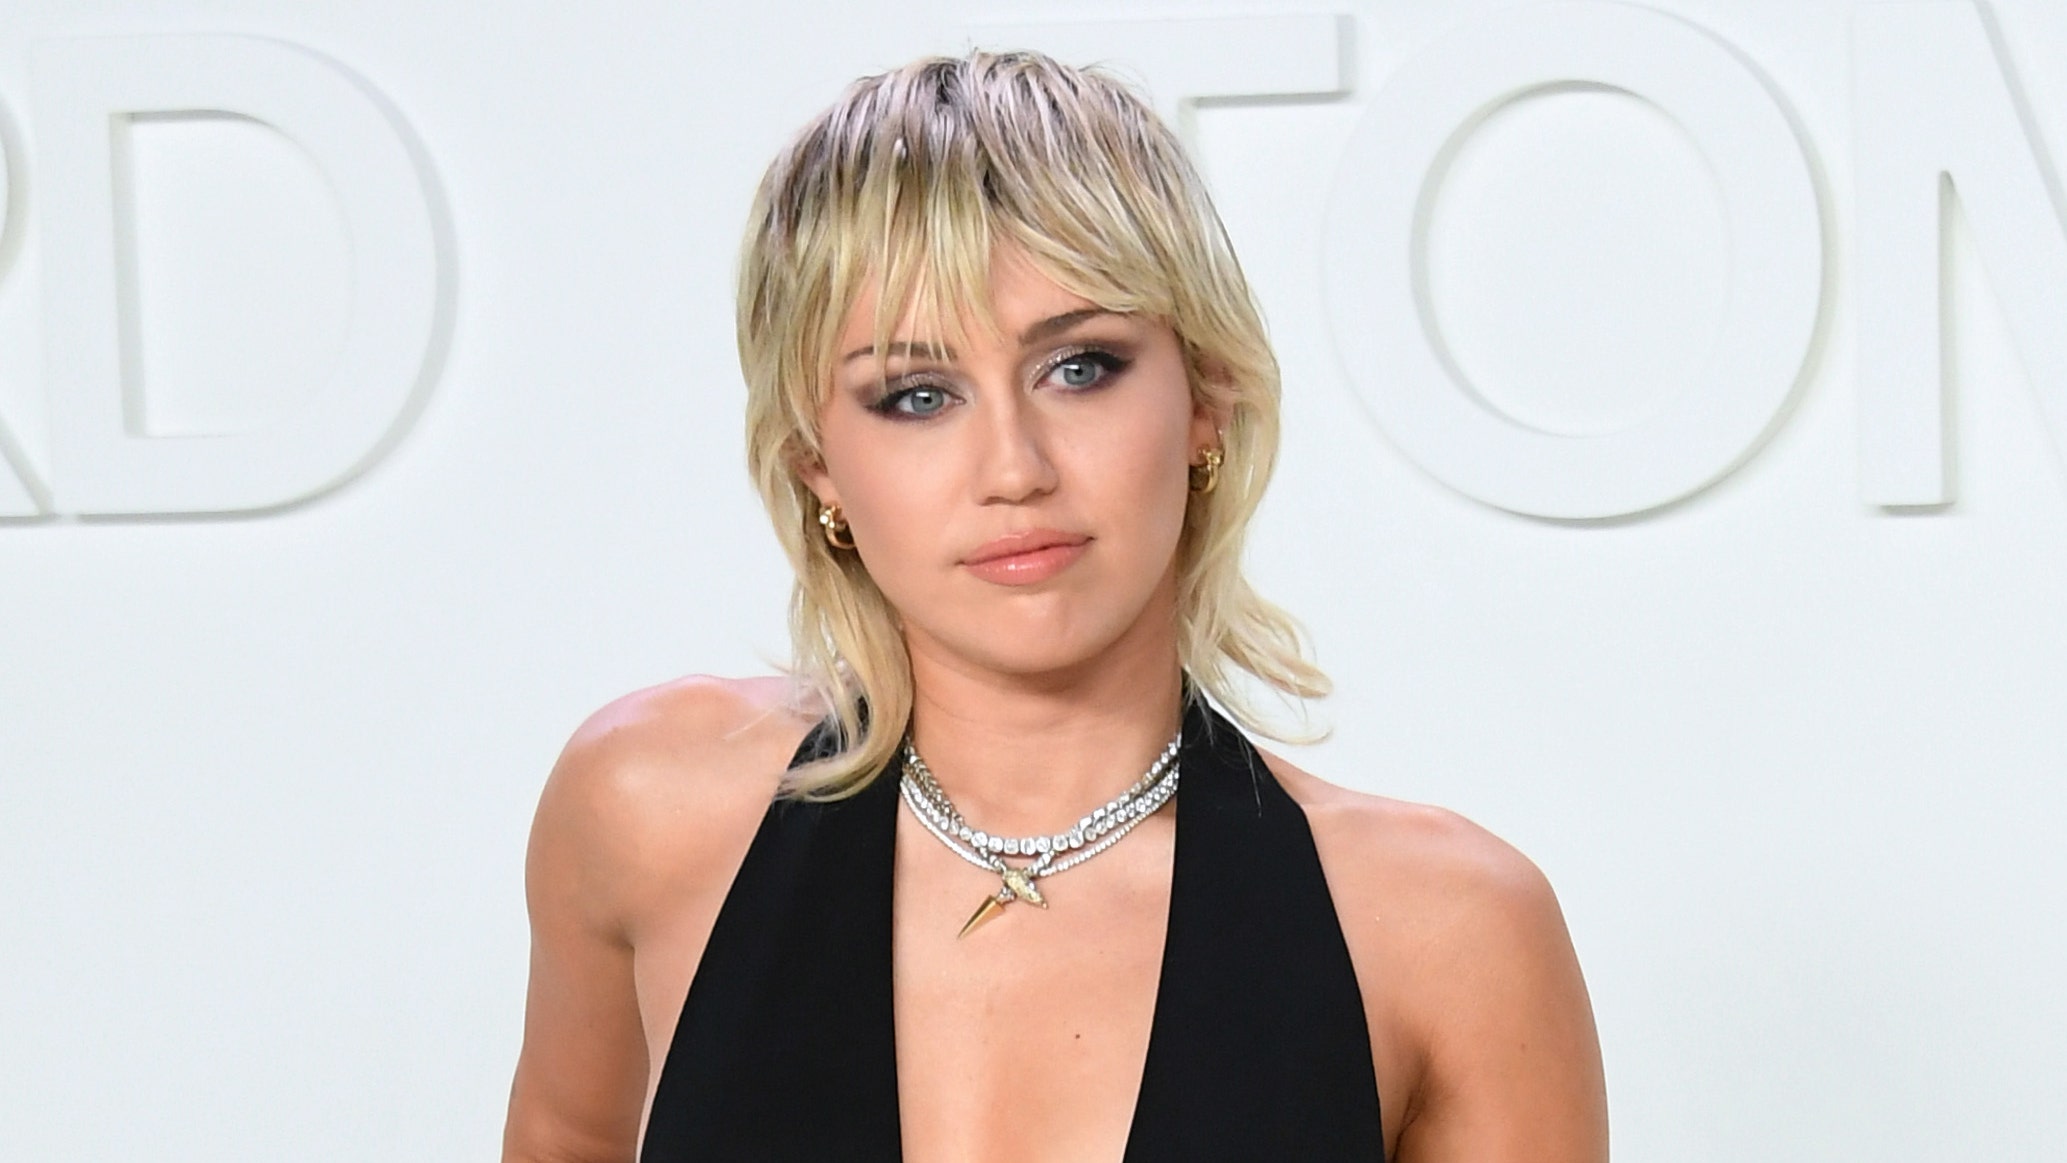 Miley Cyrus says she 'fell off' amid pandemic, reveals she's two weeks sober - Fox News